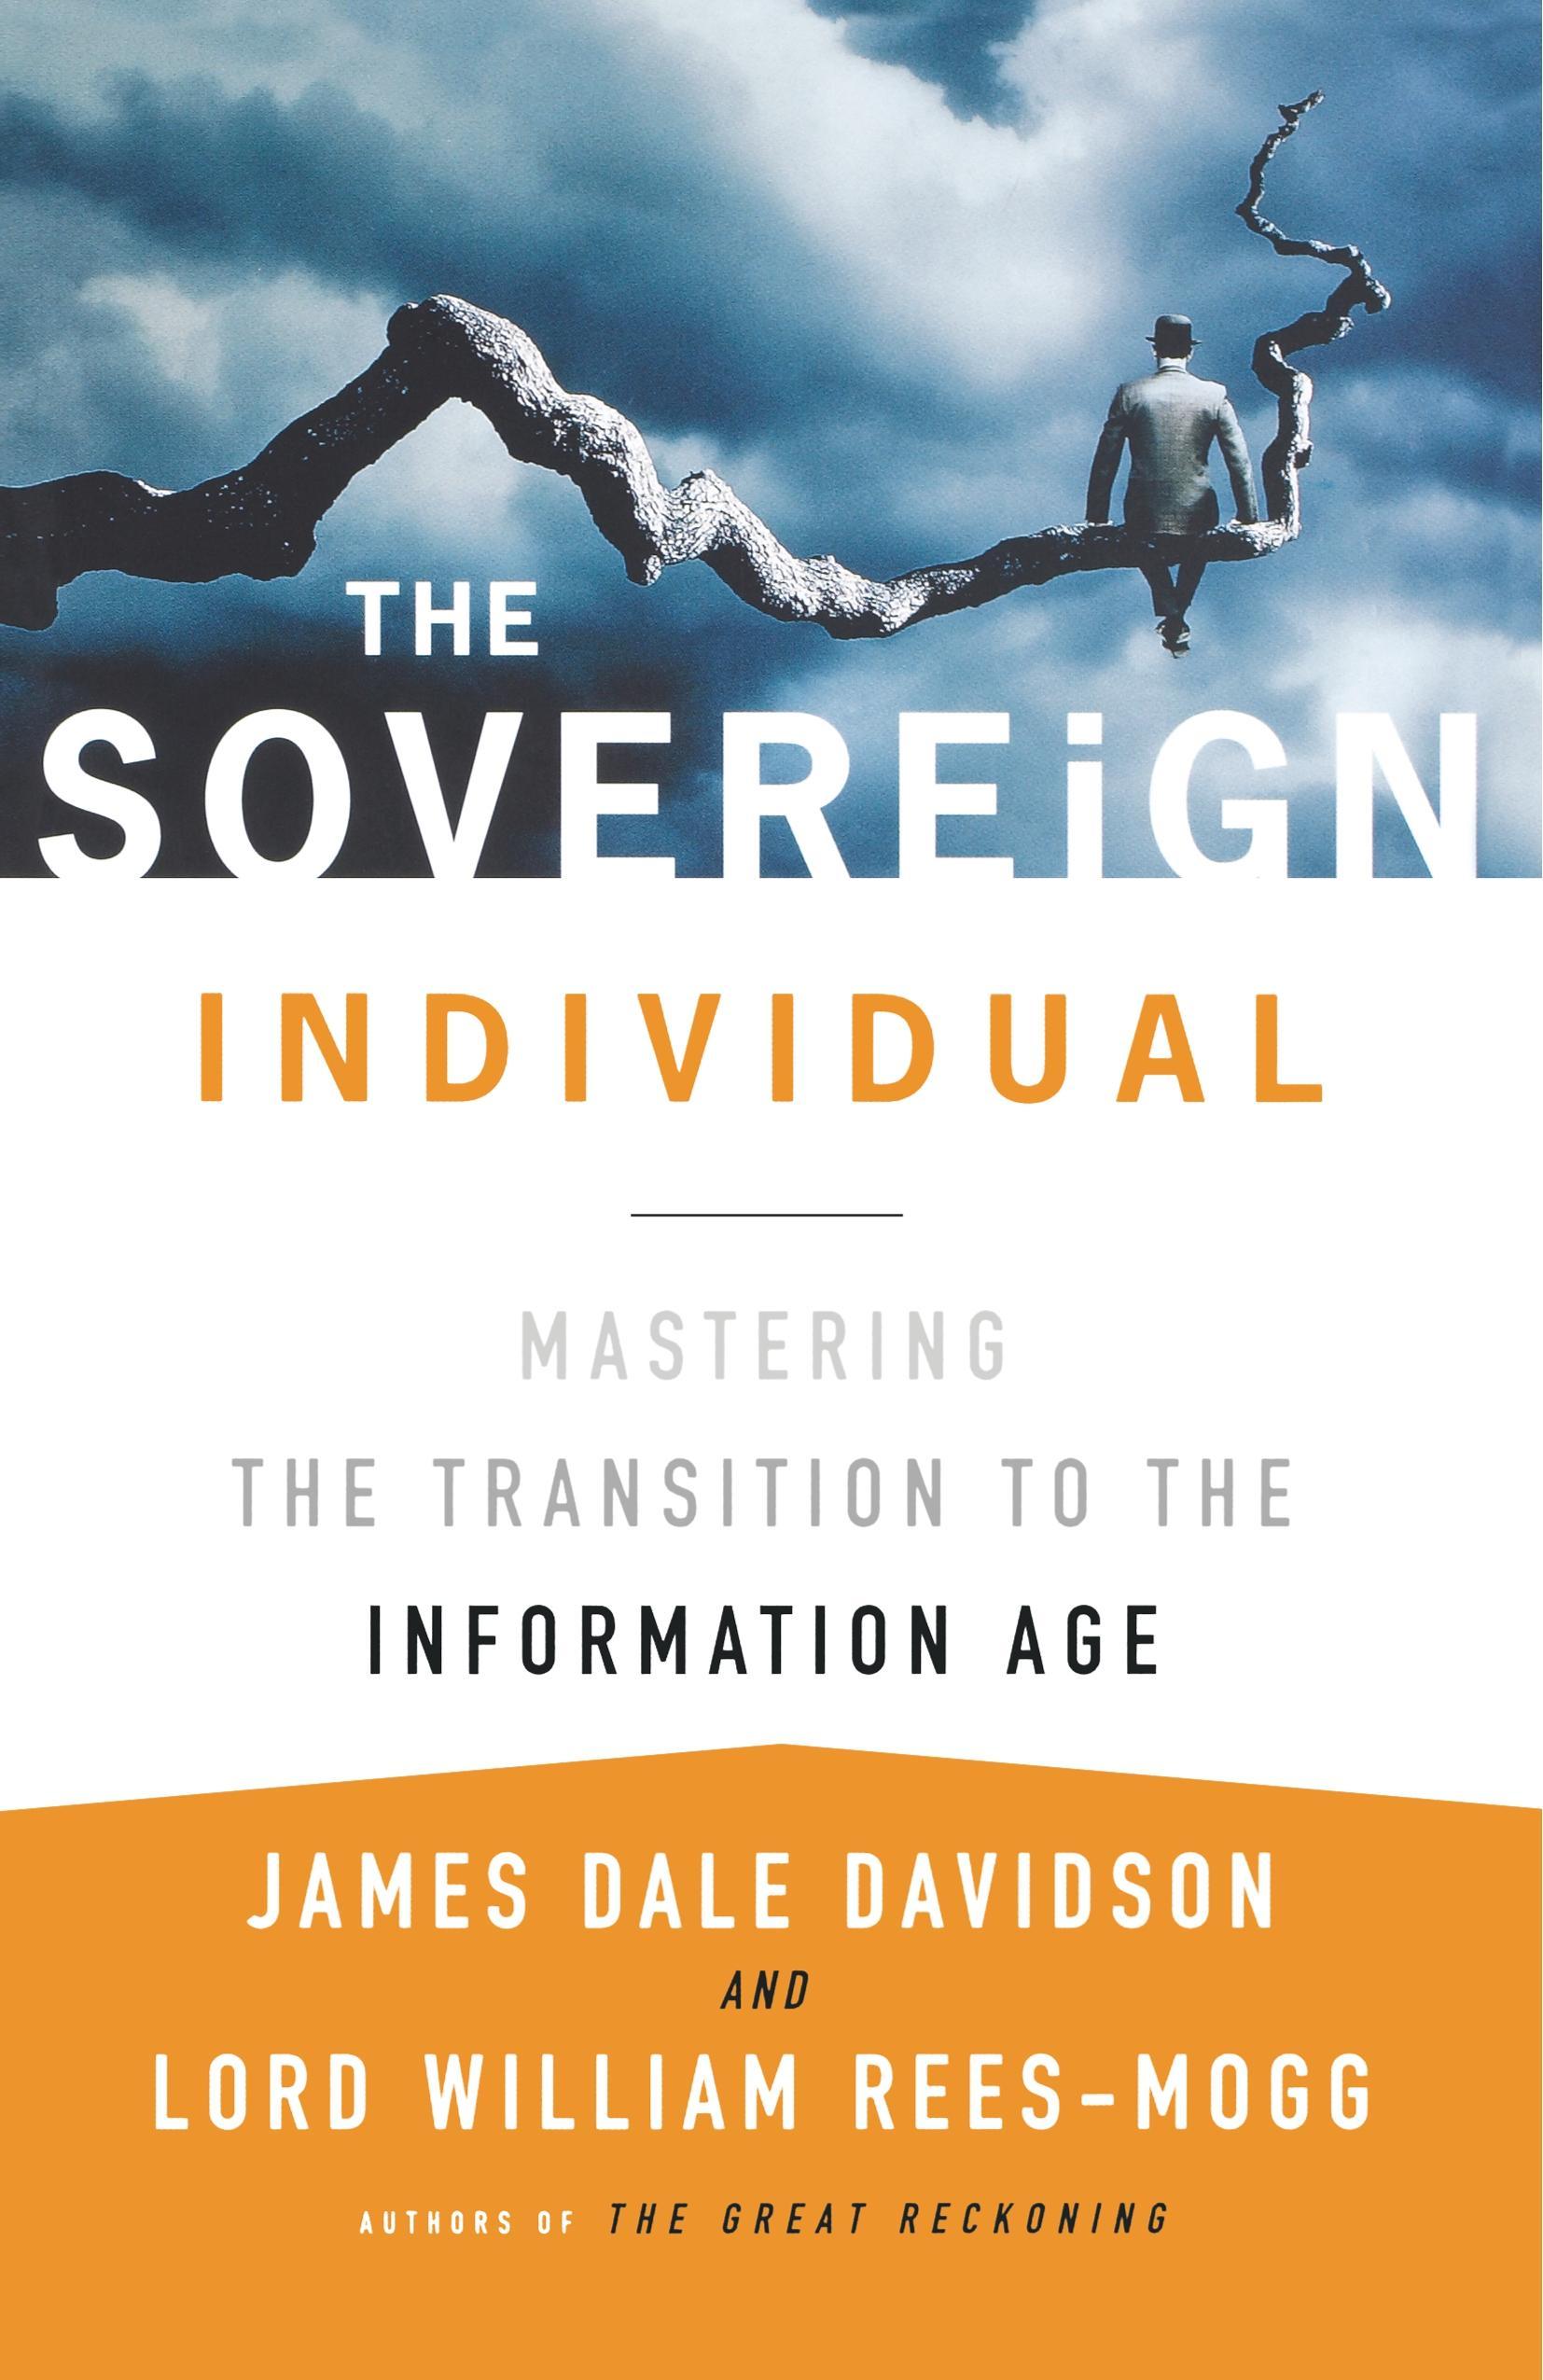 The Sovereign Individual / Mastering the Transition to the Information Age / James Dale Davidson (u. a.) / Taschenbuch / 446 S. / Englisch / 1999 / Simon + Schuster LLC / EAN 9780684832722 - Davidson, James Dale